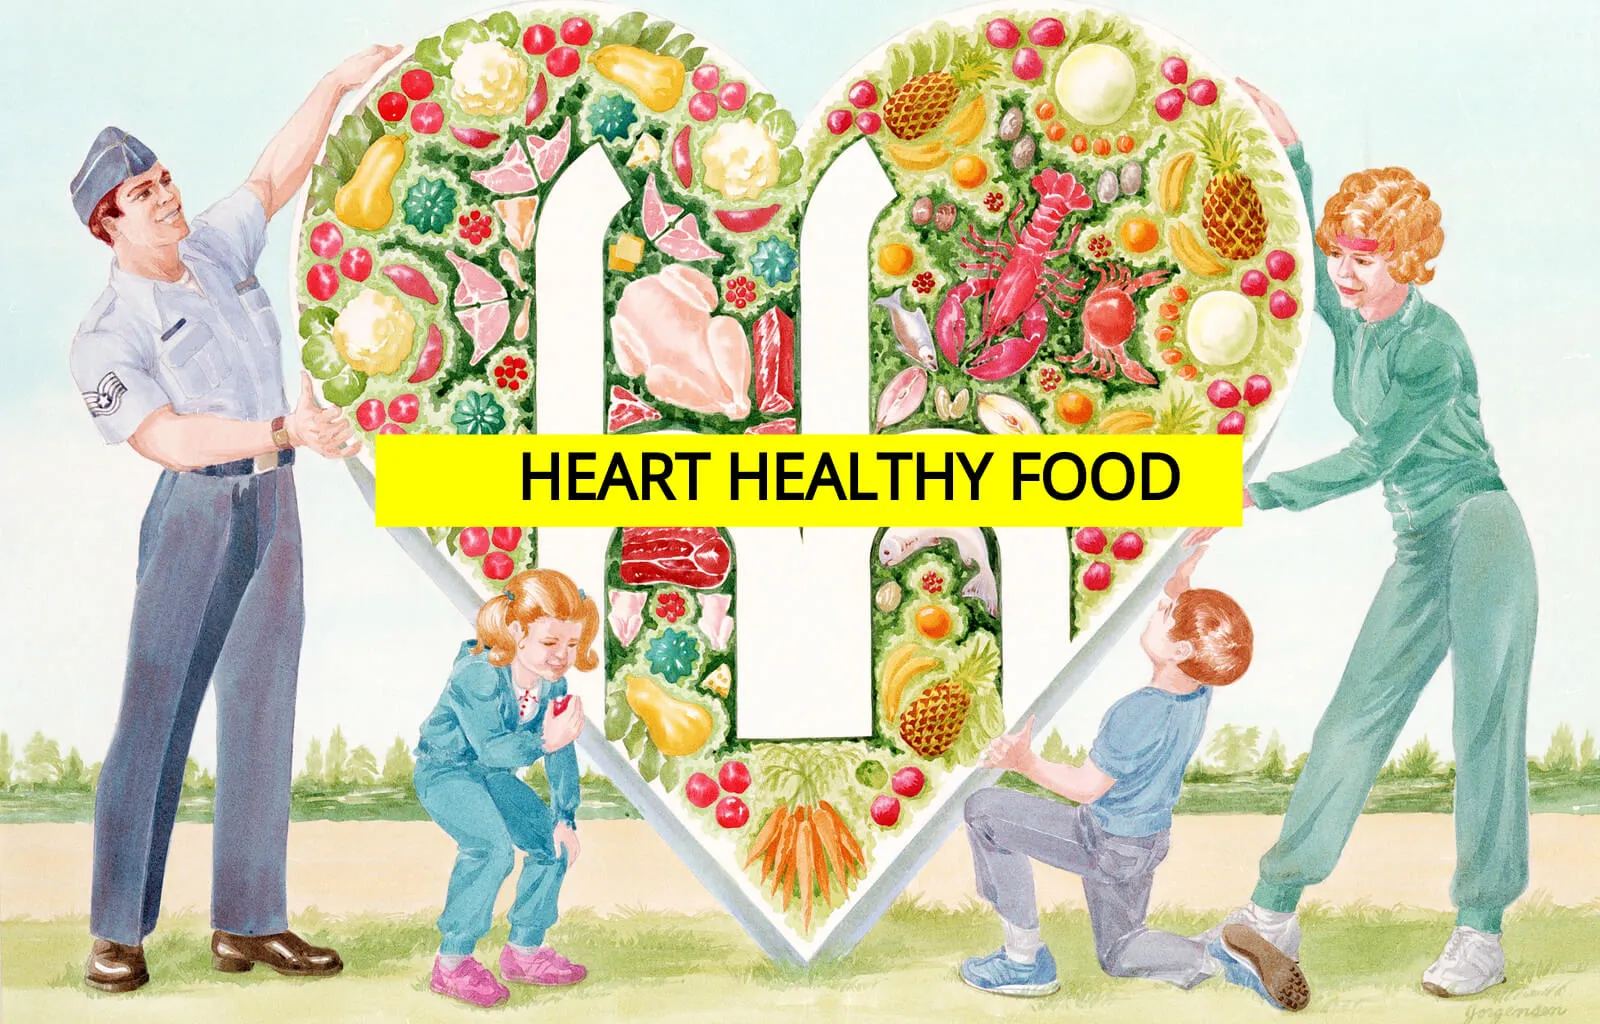 A Simple-To-Cook Meal Plan For Your Heart | Credihealth